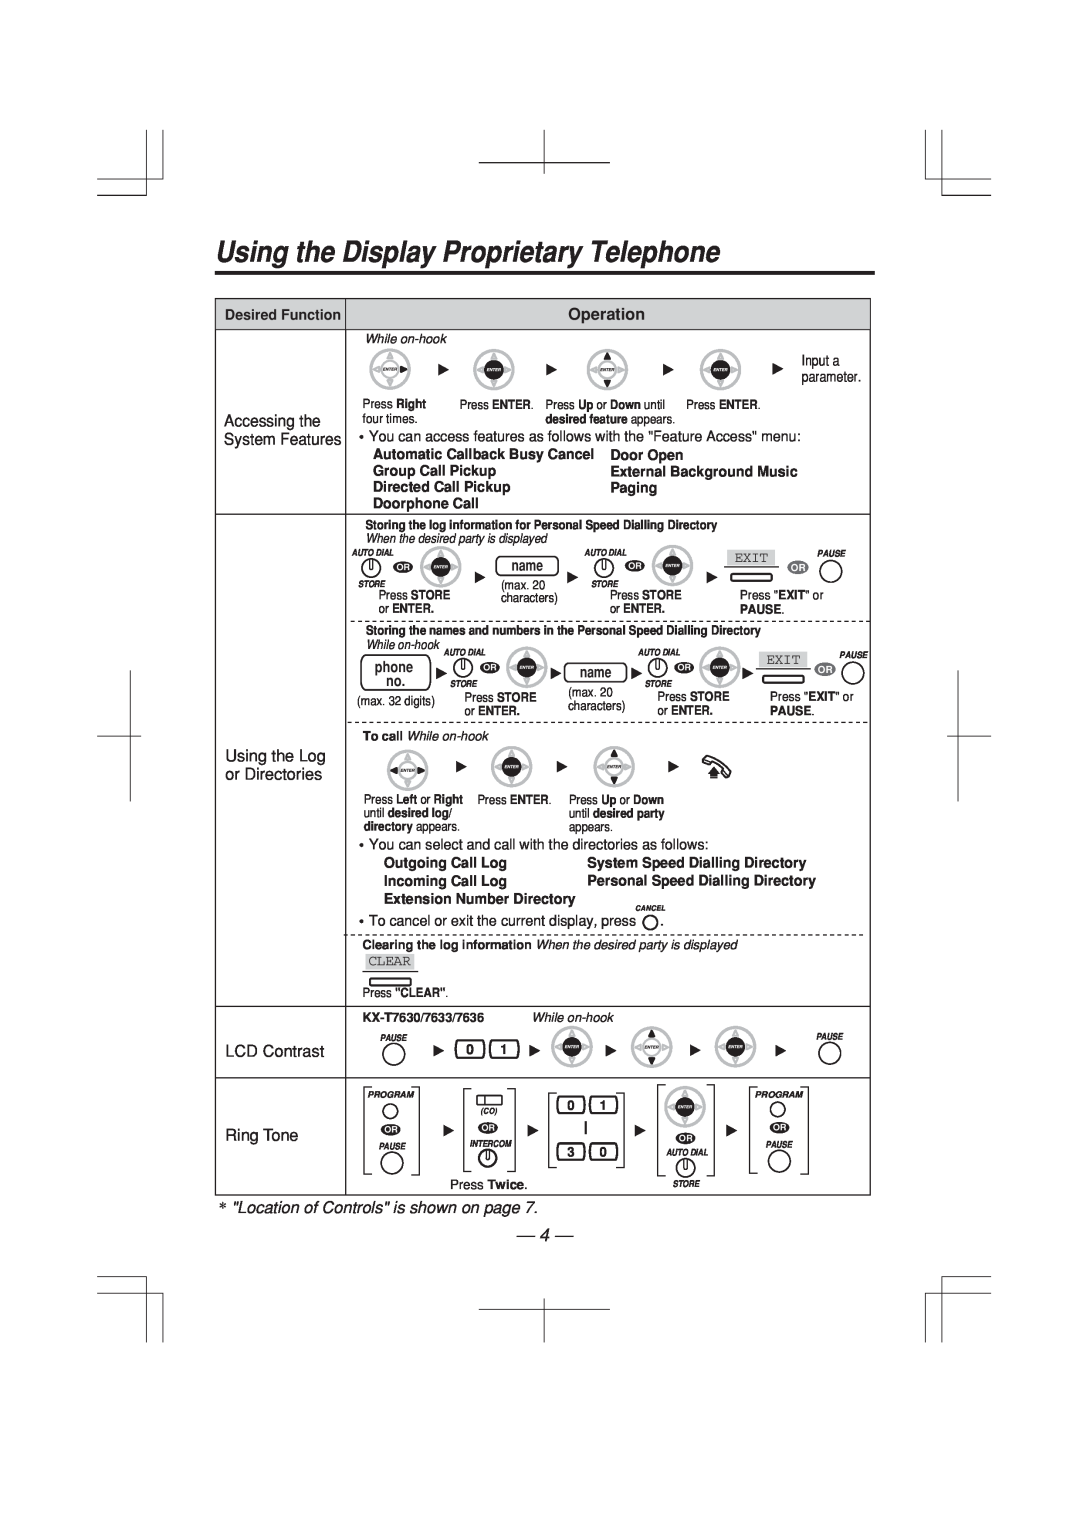 Panasonic KX-T7625E Using the Display Proprietary Telephone, Operation, Accessing the, System Features, Using the Log 